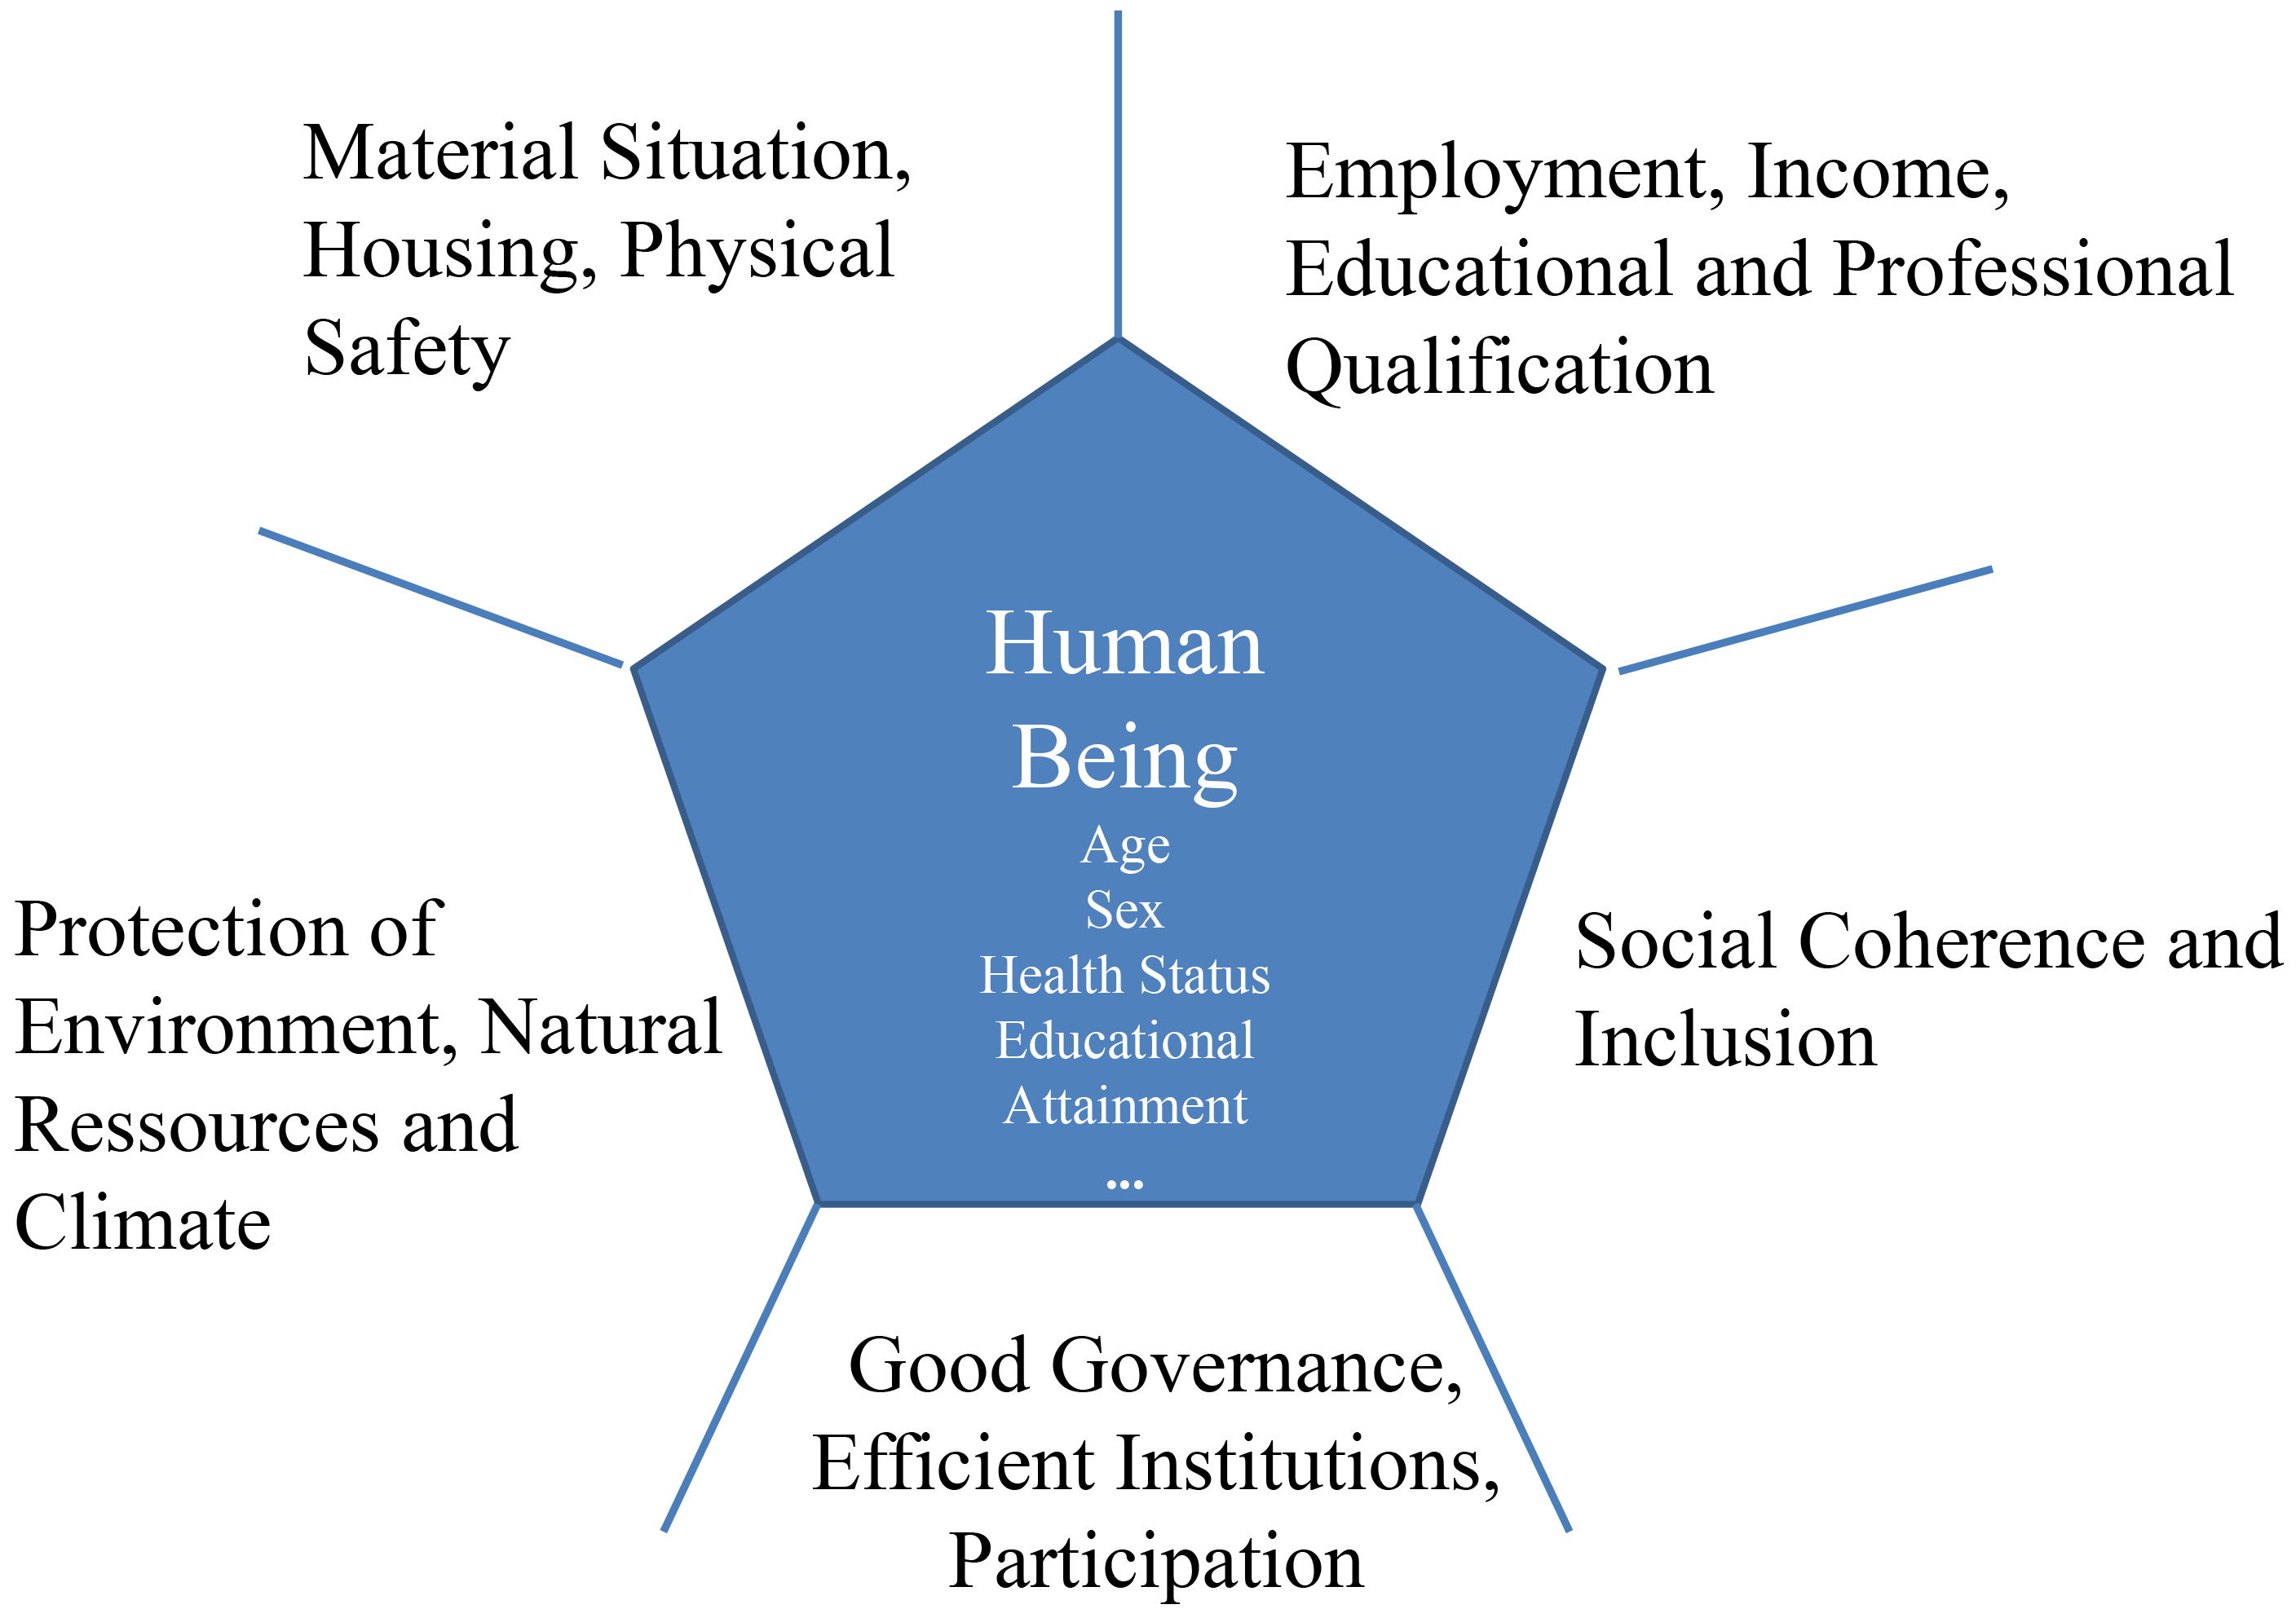 Dimensions of well-being.